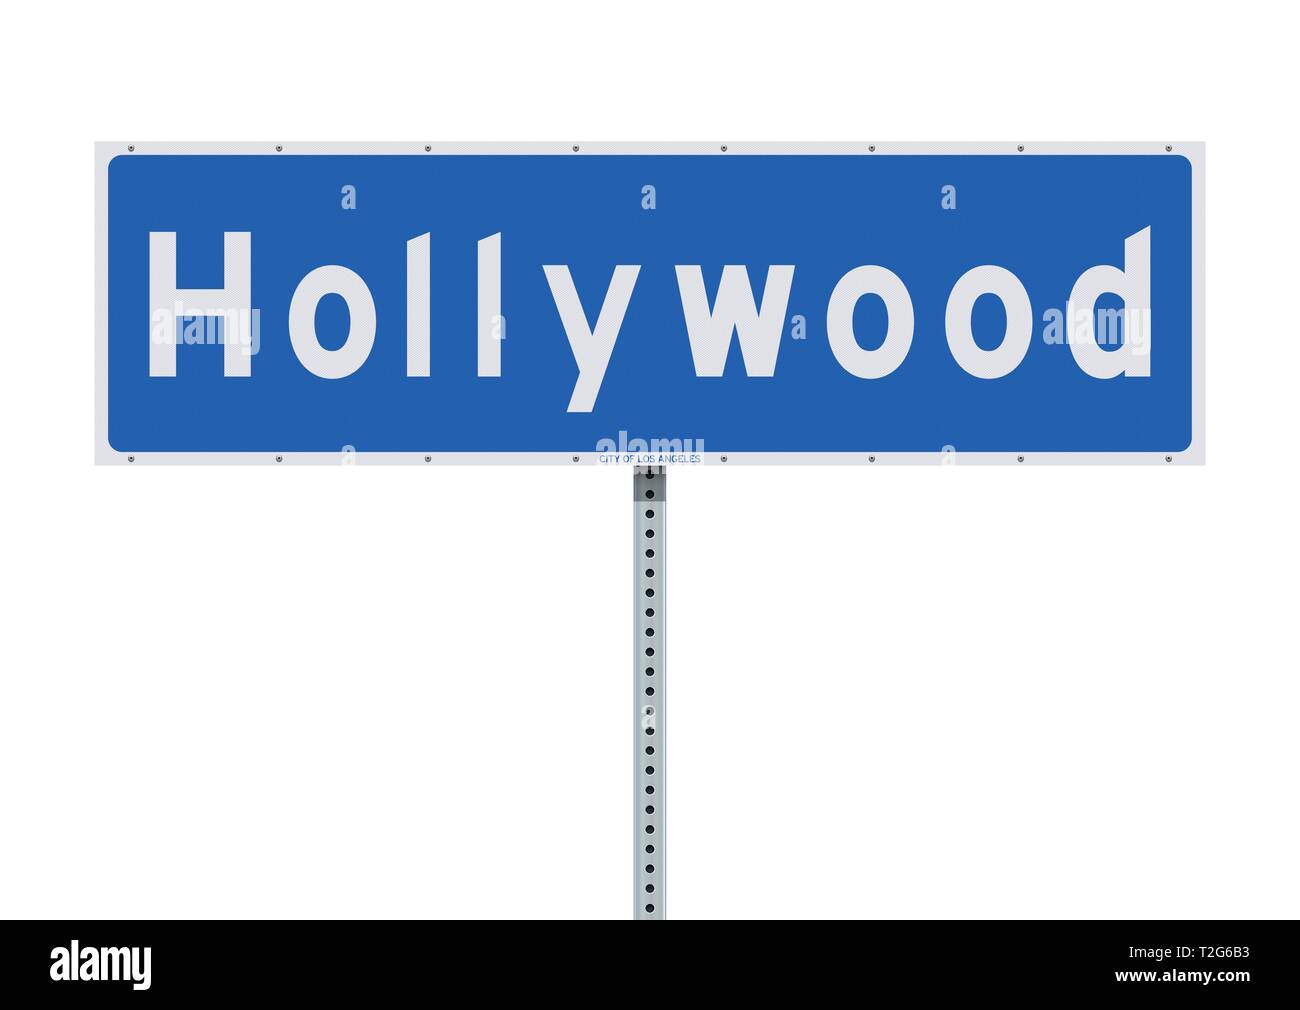 hollywood hills sign vector